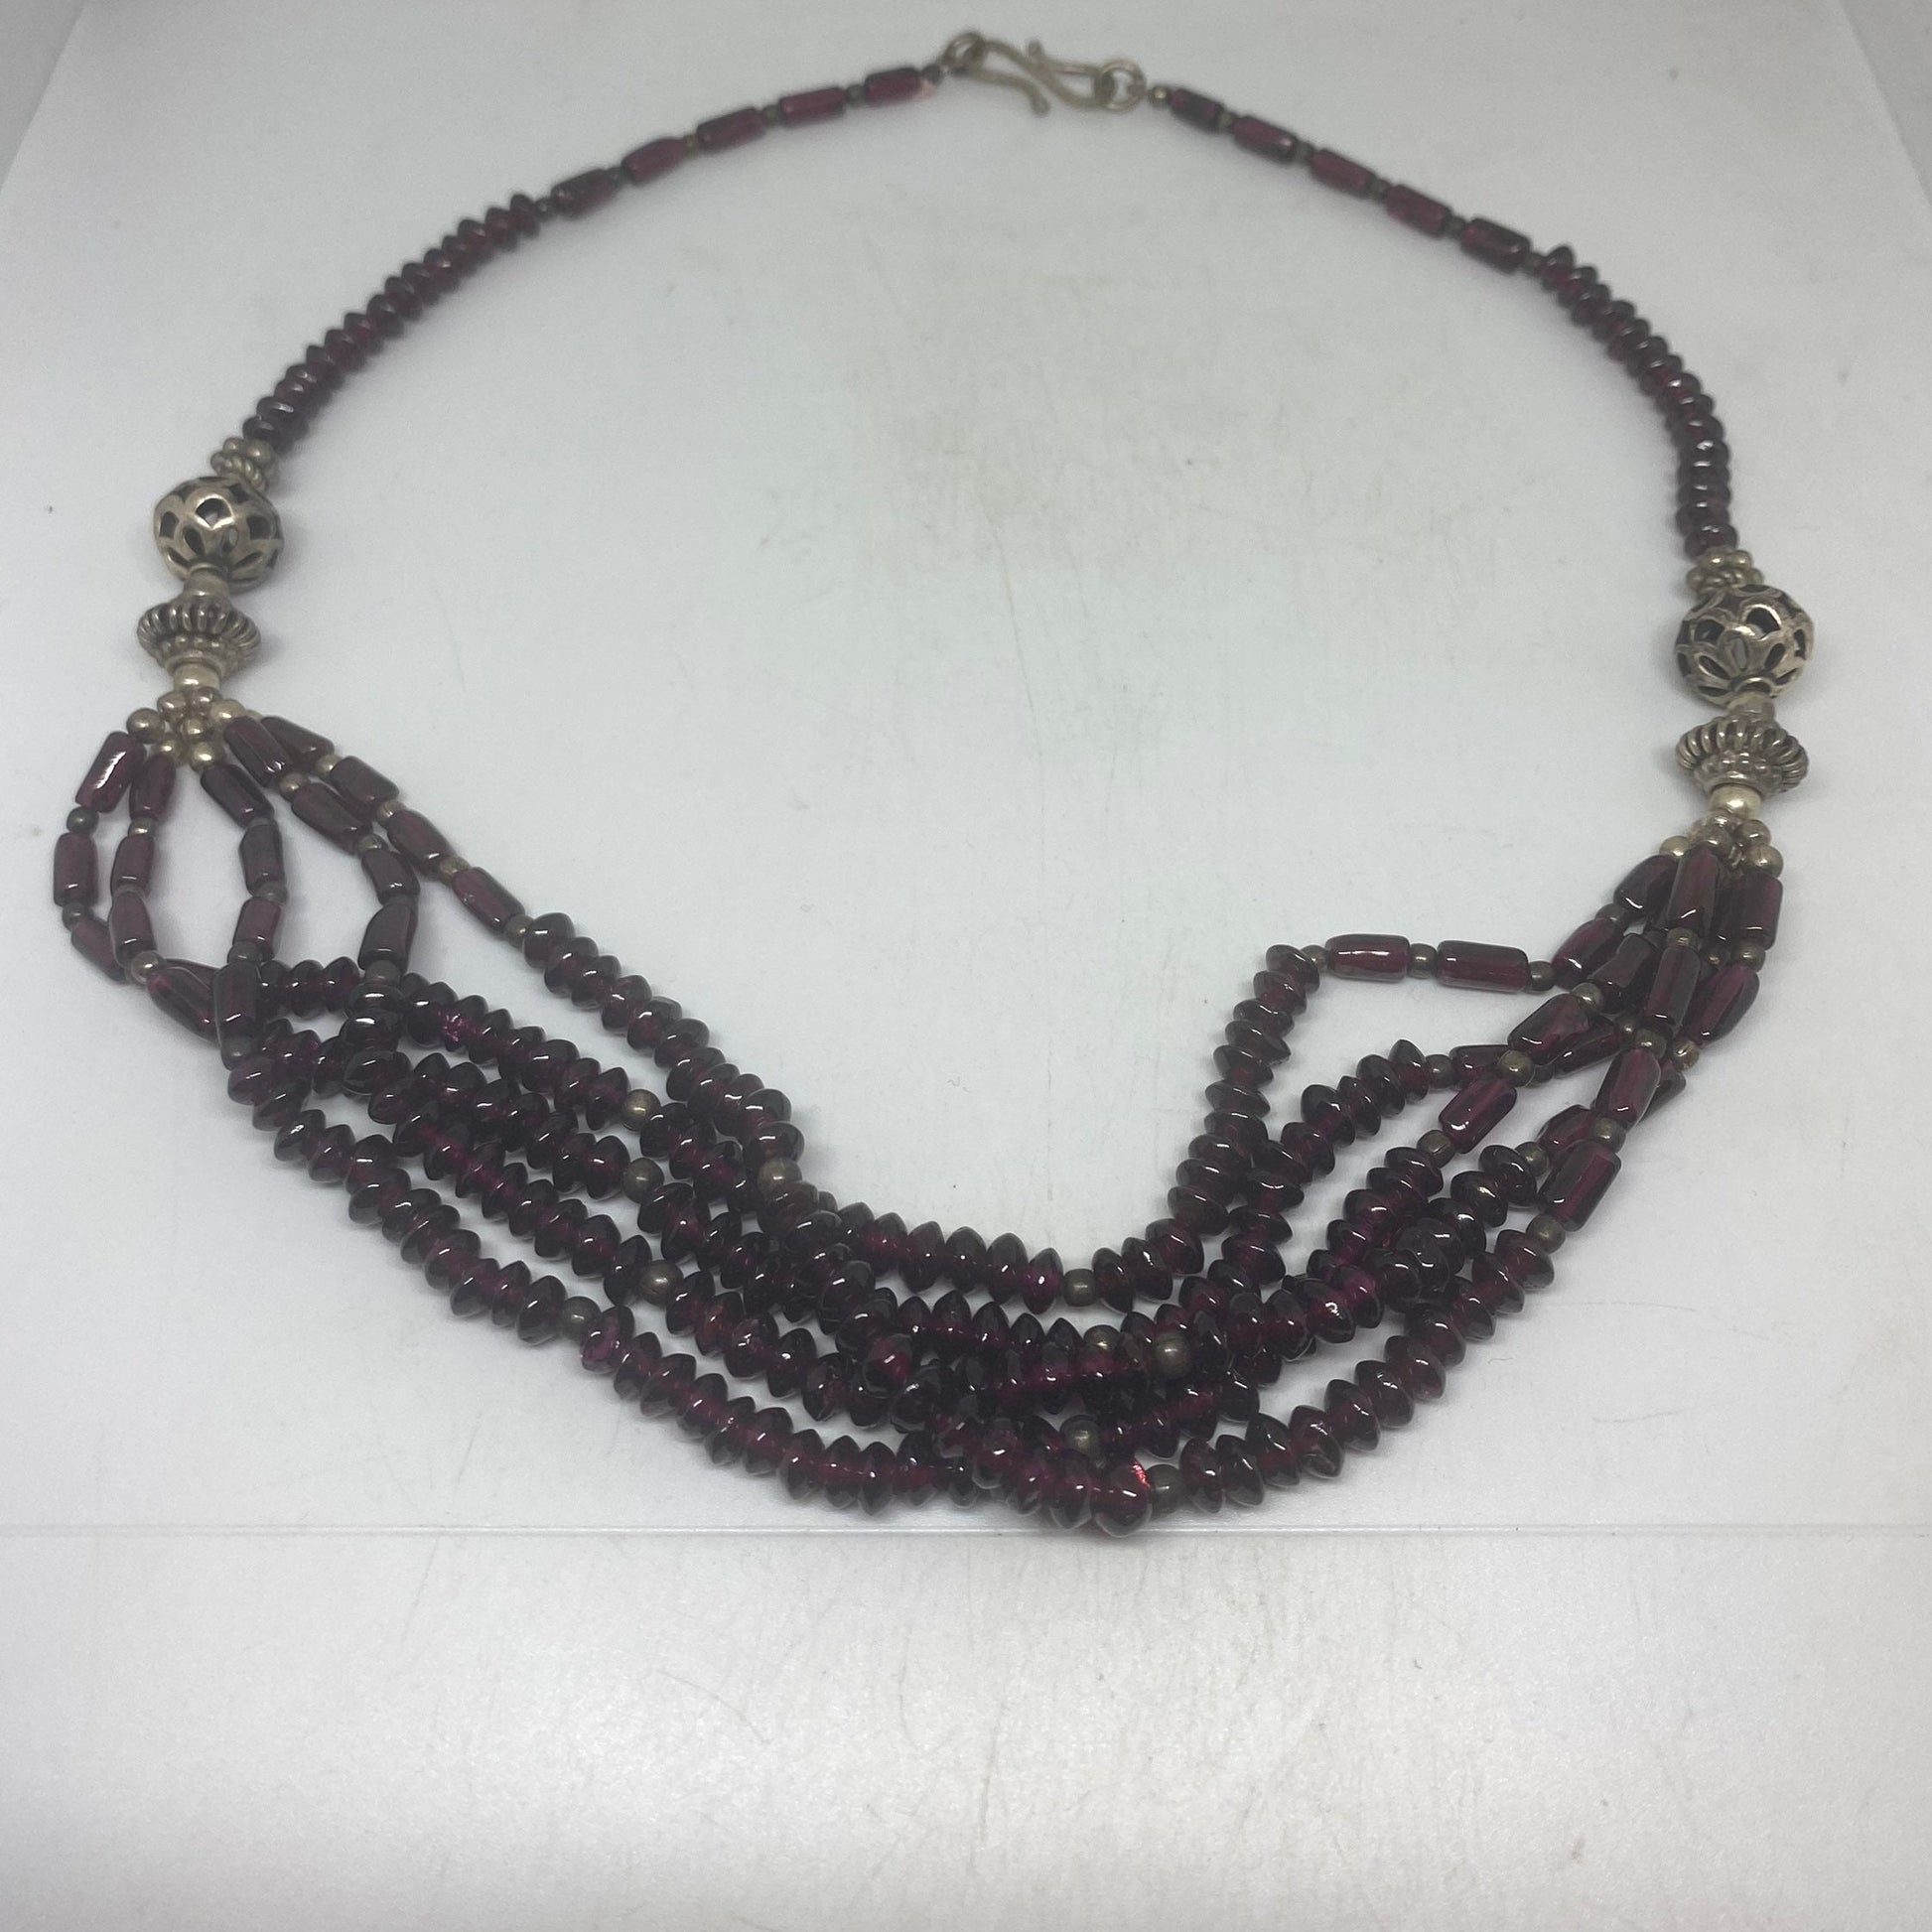 Vintage Moroccan Red Garnet Necklace with 925 Sterling Silver